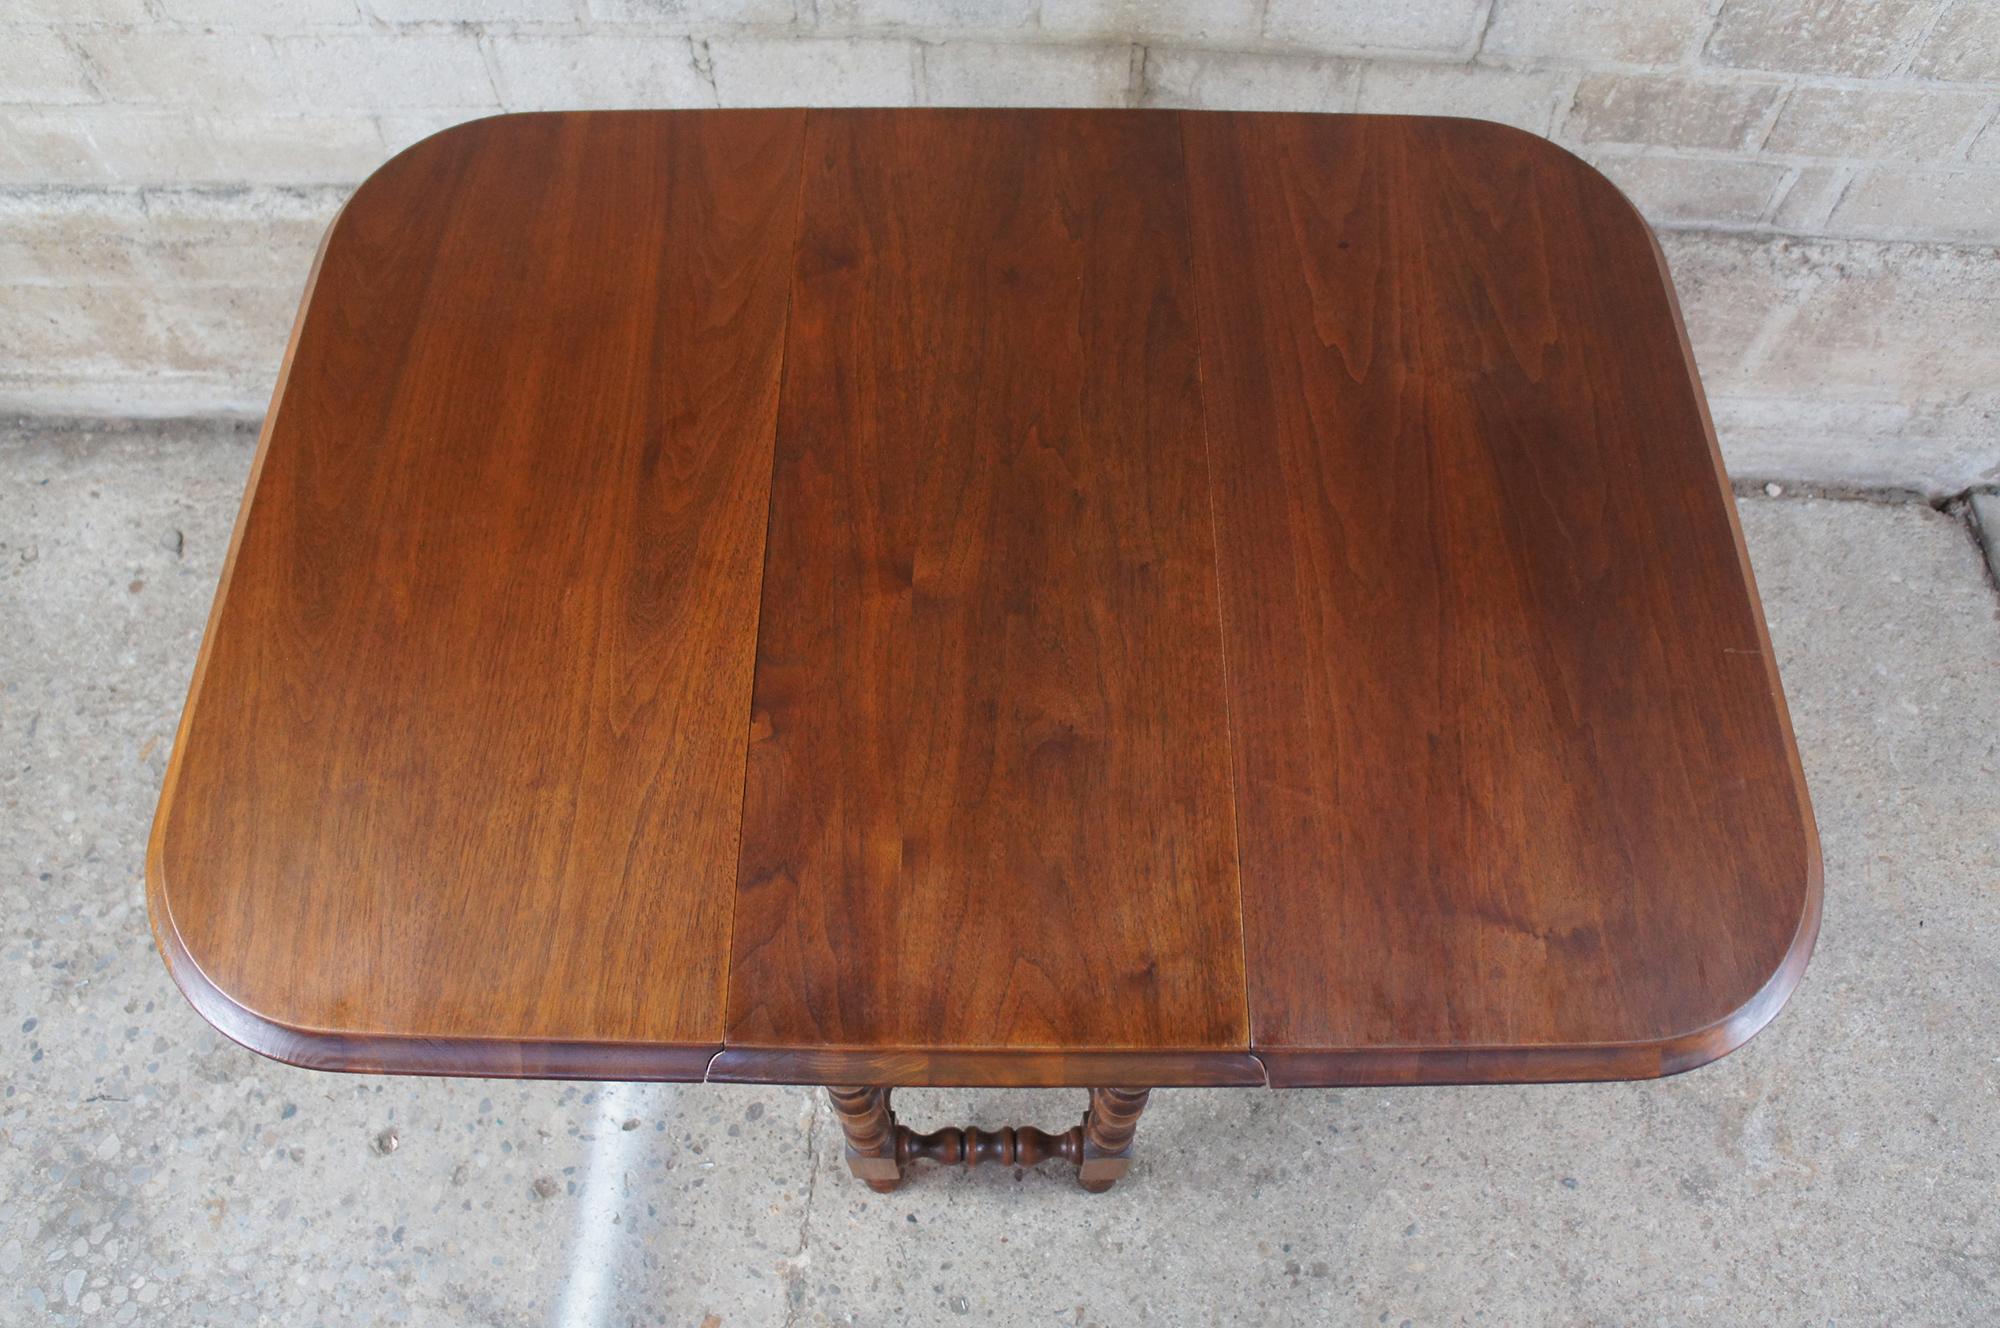 William and Mary Antique Early 20th Century Walnut Drop Leaf Gateleg Dining Table William & Mary